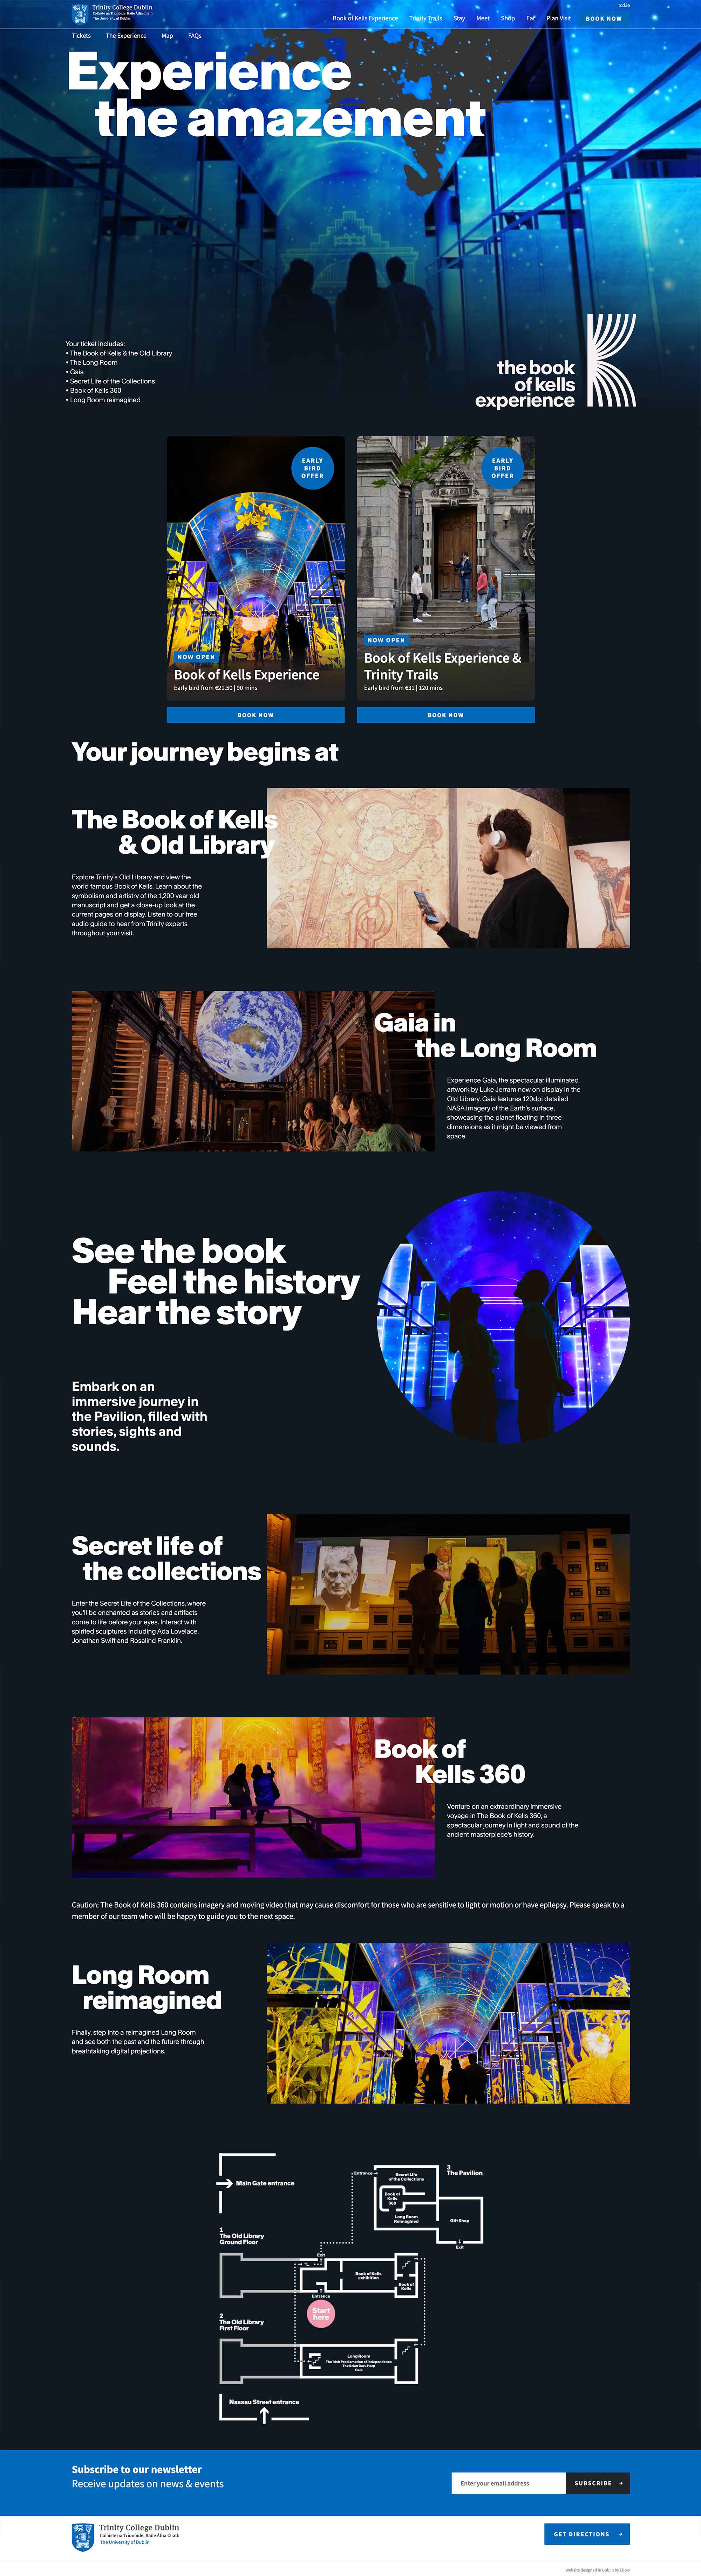 Web Design for Book of Kells Experience at Trinity College Dublin